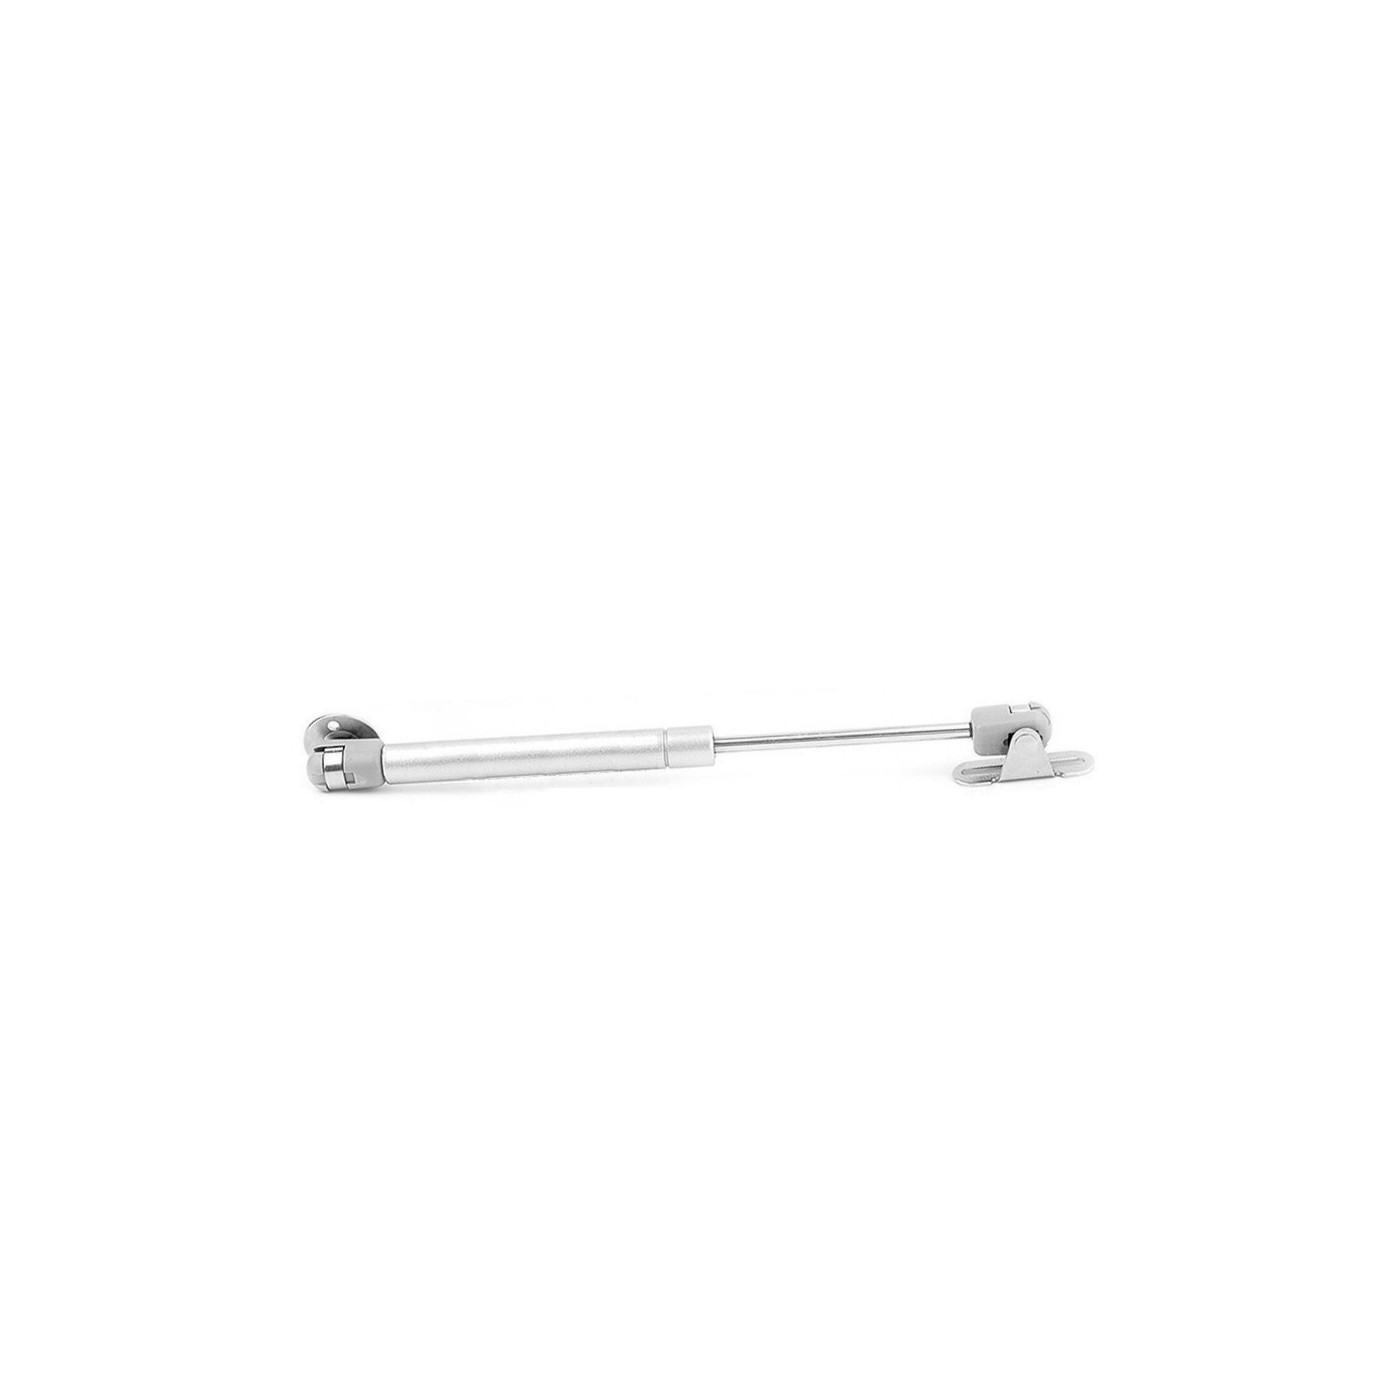 Universal gas spring with brackets (100N/10kg, 285 mm, silver)